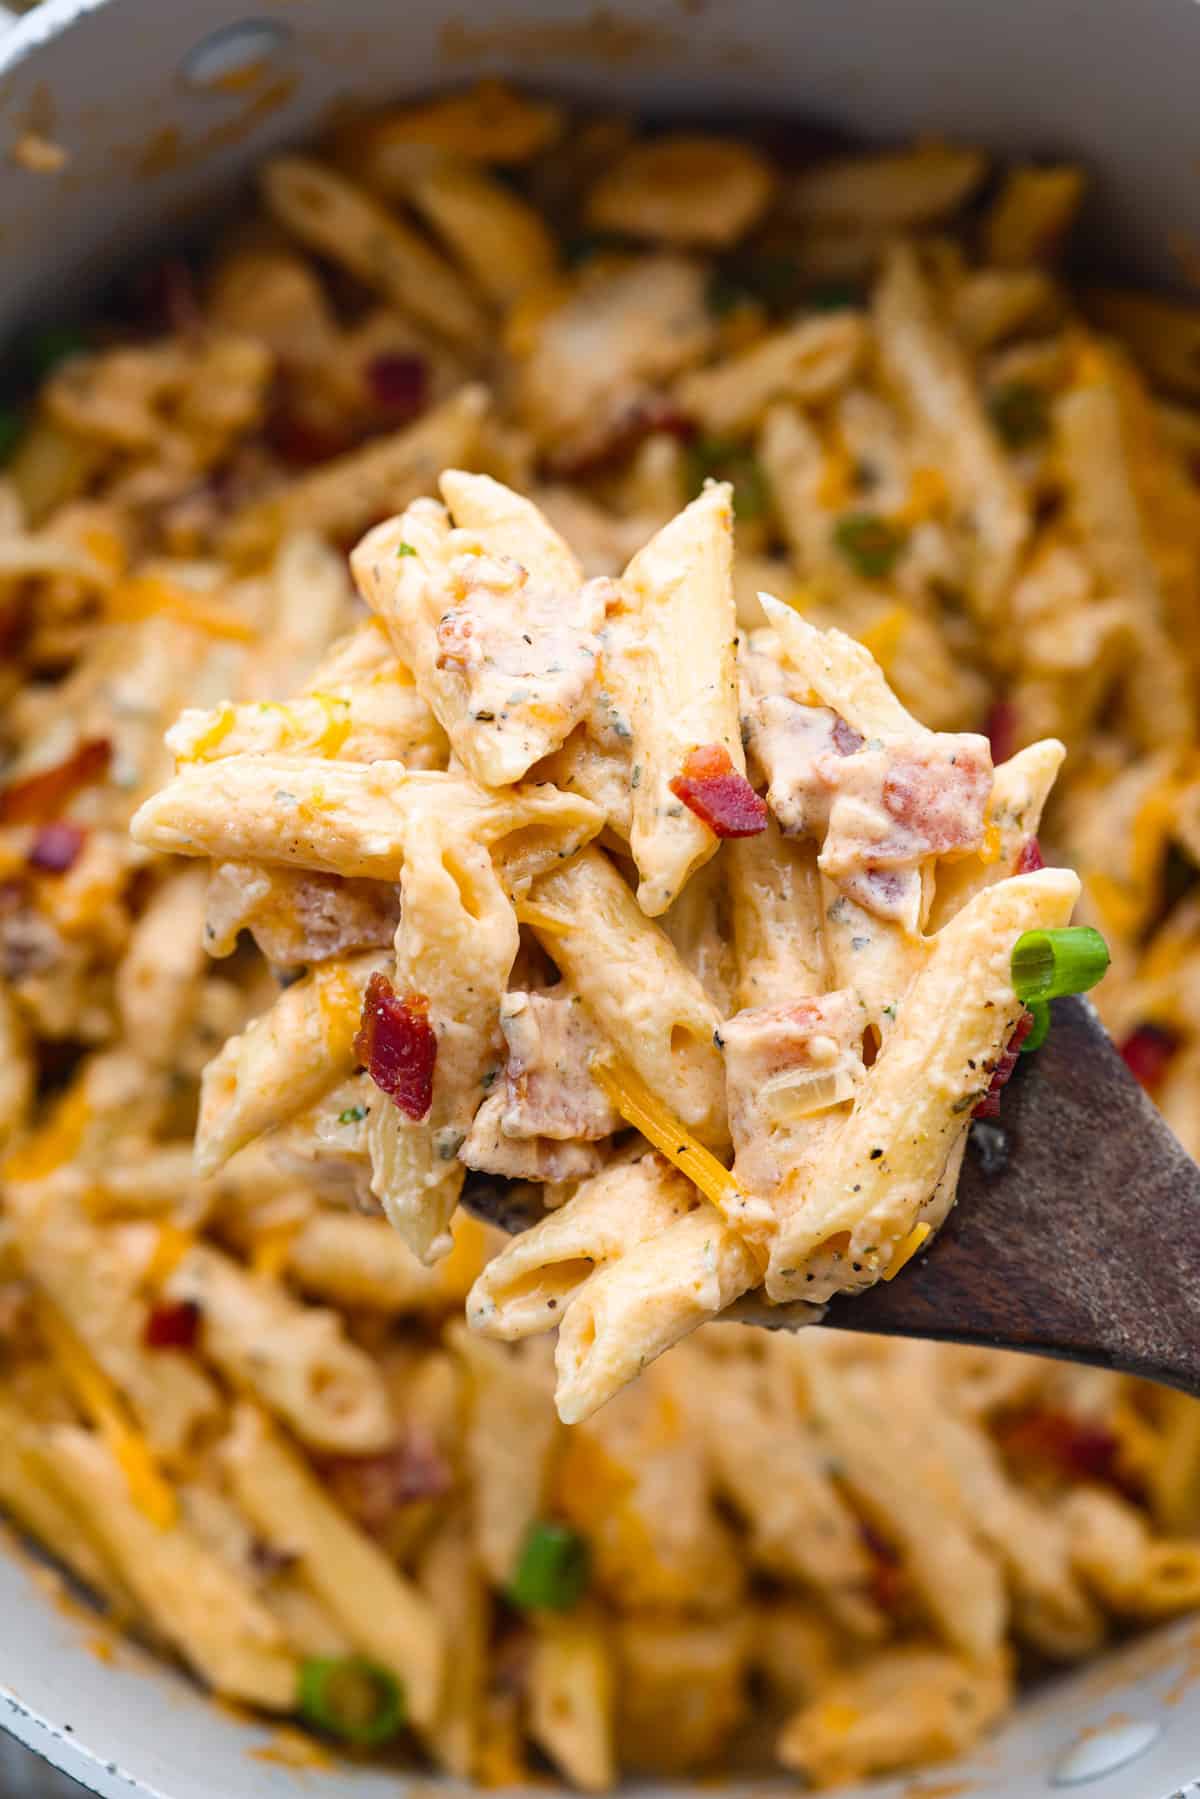 A close-up view of creamy chicken pasta with red peppers and green onions in a pot, perfect for easy dinner ideas, with a wooden spoon lifting some of the dish.